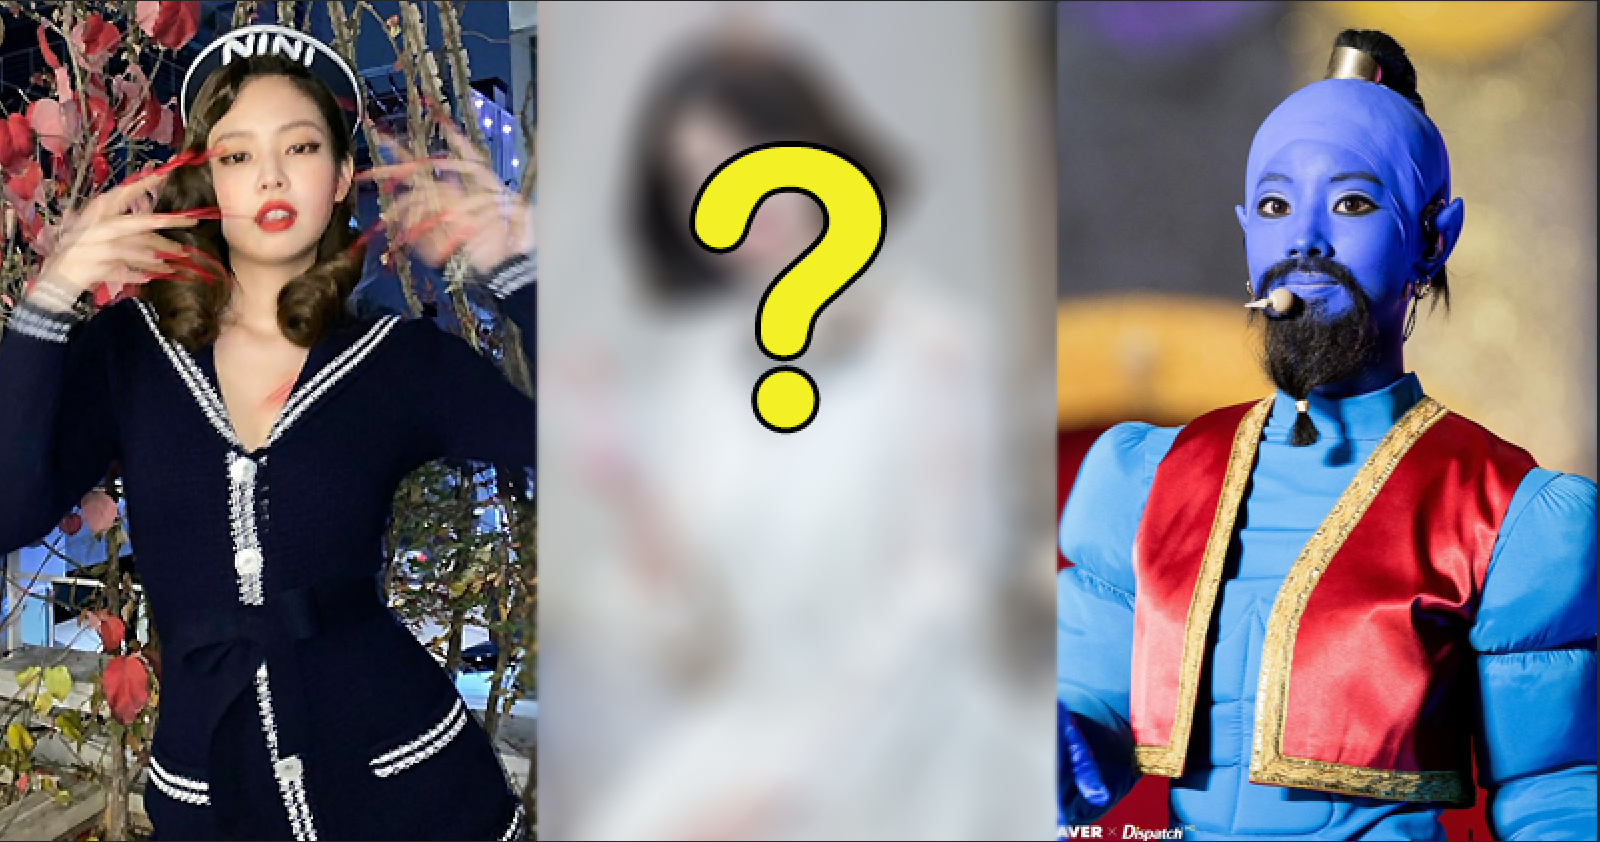 10 Female K-Pop Idols That Fans Cannot Wait To See Their Halloween Costumes